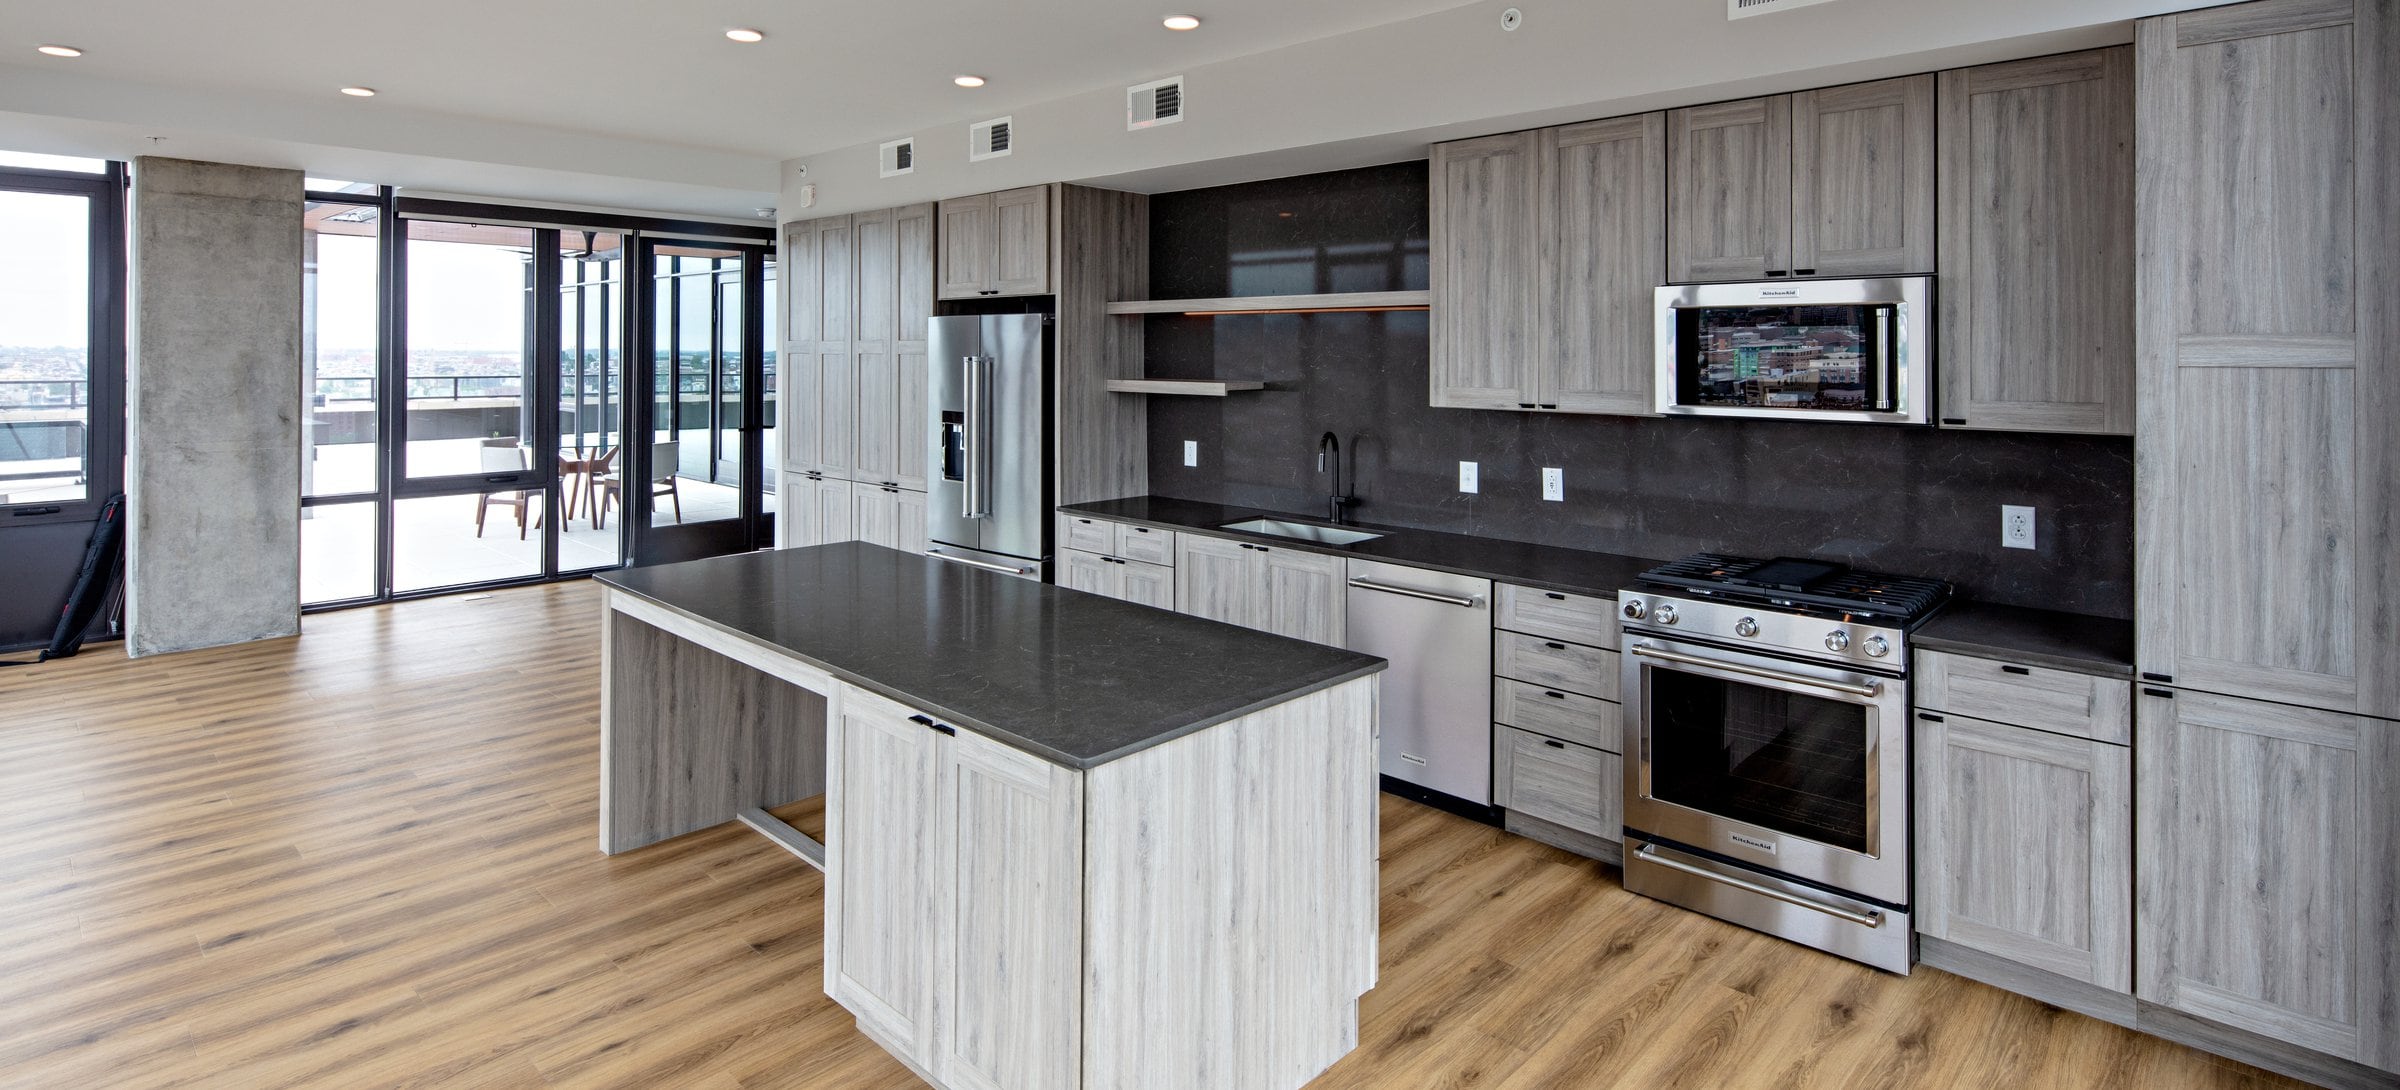 Penthouse-level Signature Collection apartment homes feature kitchens with upgraded finishes and appliances